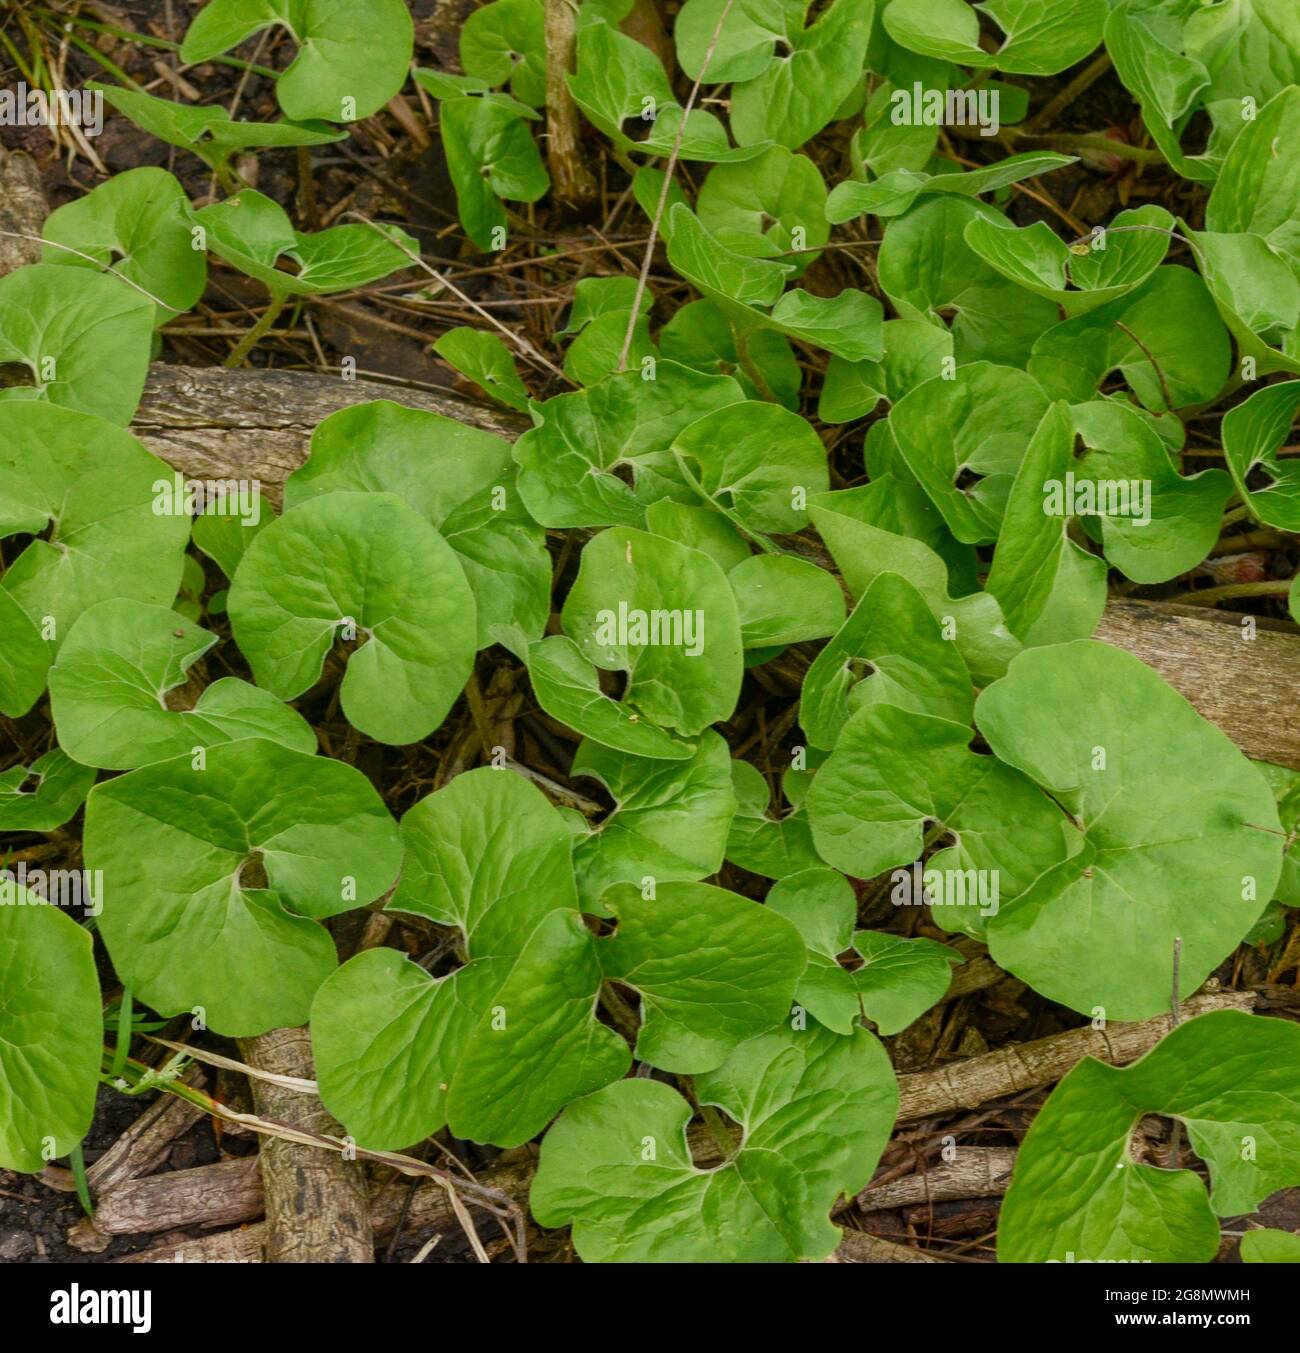 green leafy ground cover Stock Photo